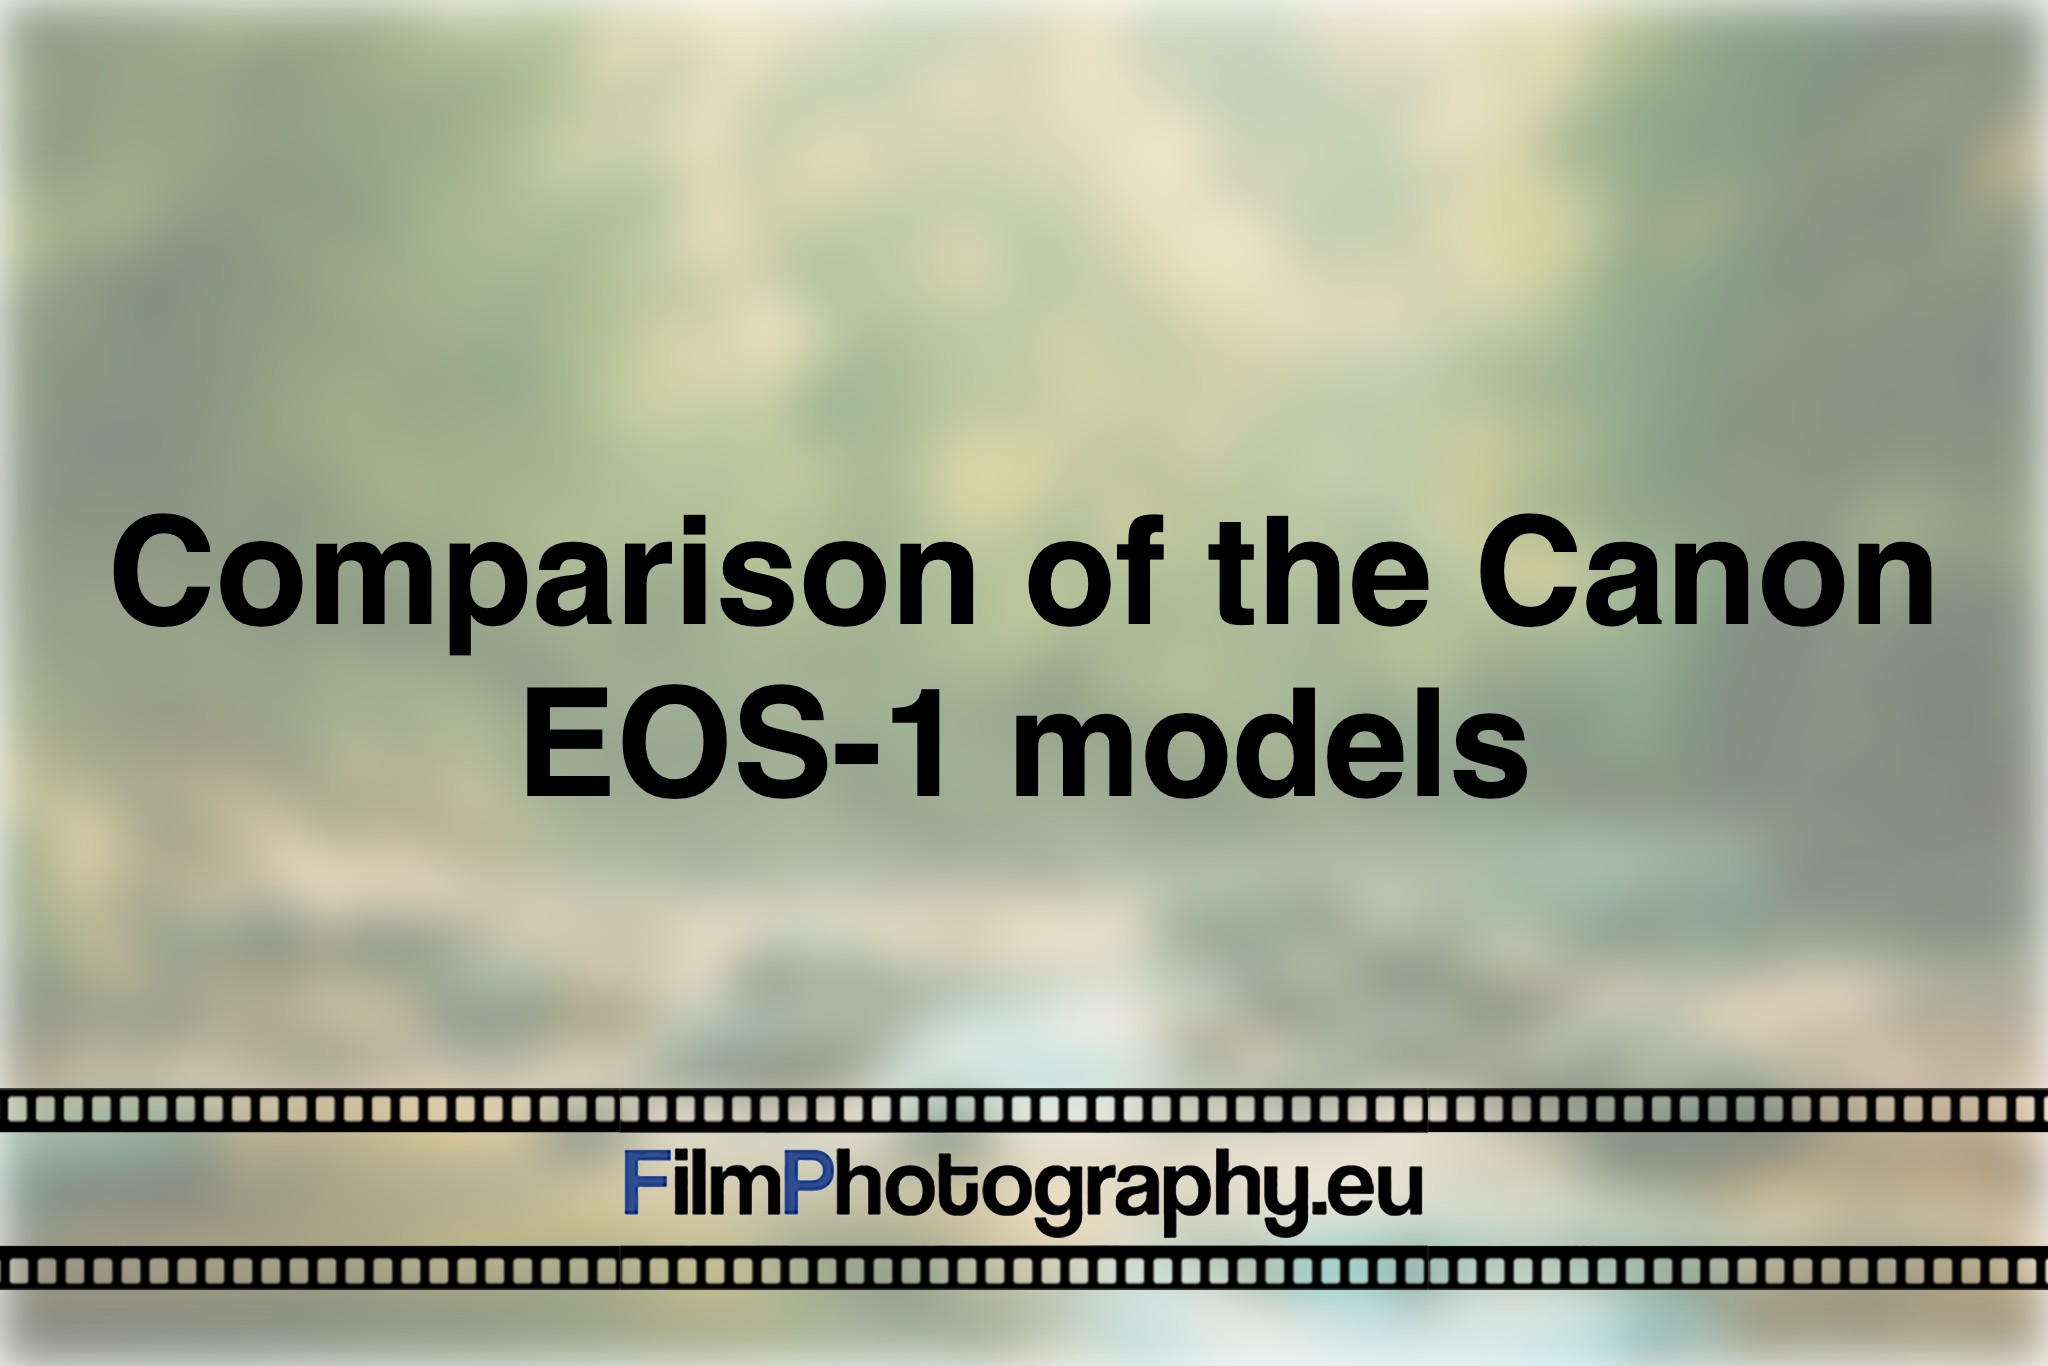 comparison-of-the-canon-eos-1-models-photo-bnv